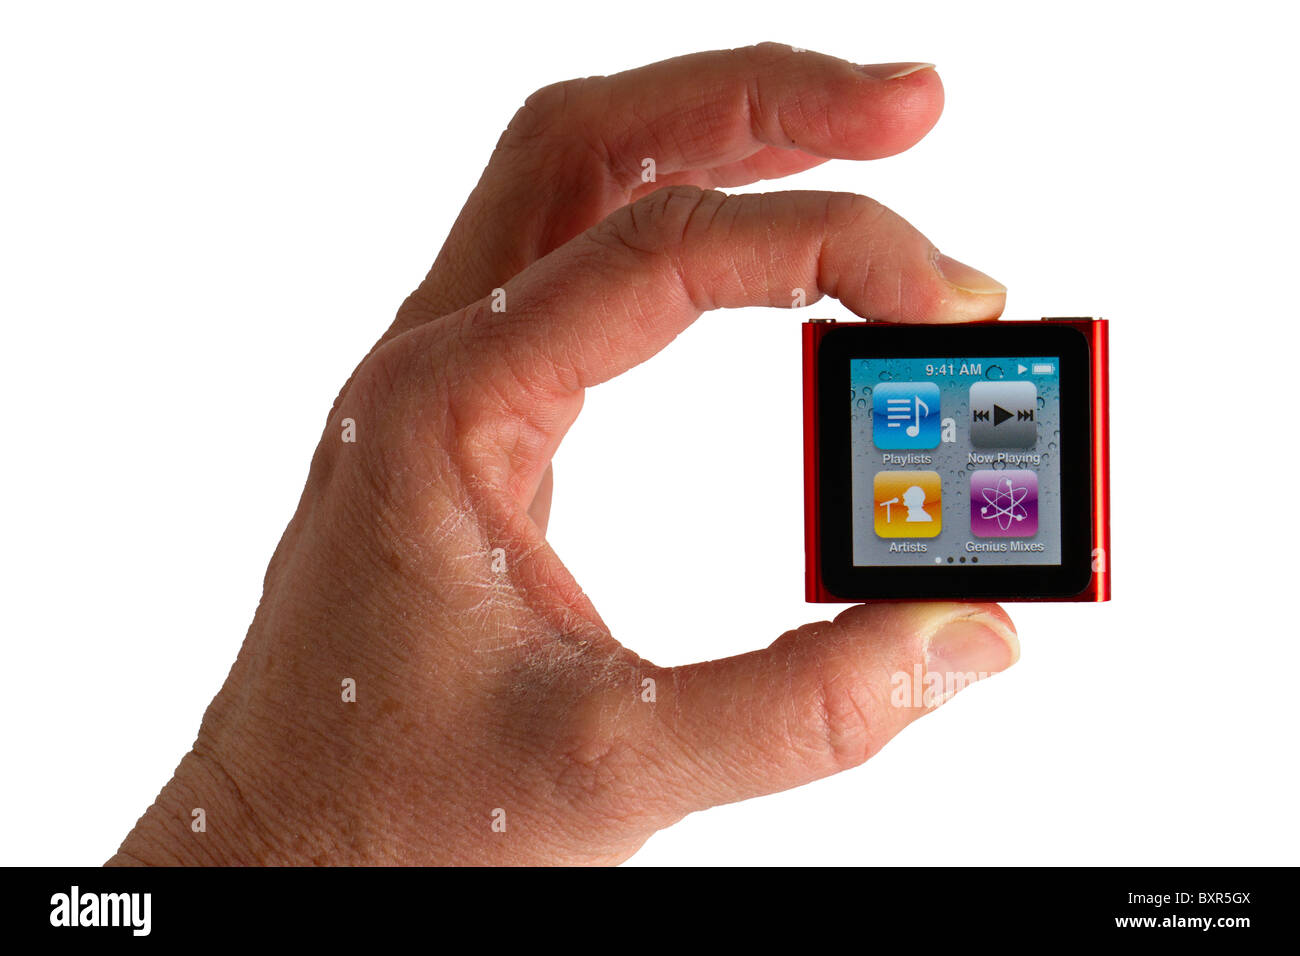 Apple iPod Nano, sixth generation, held by a hand, on white background. Stock Photo